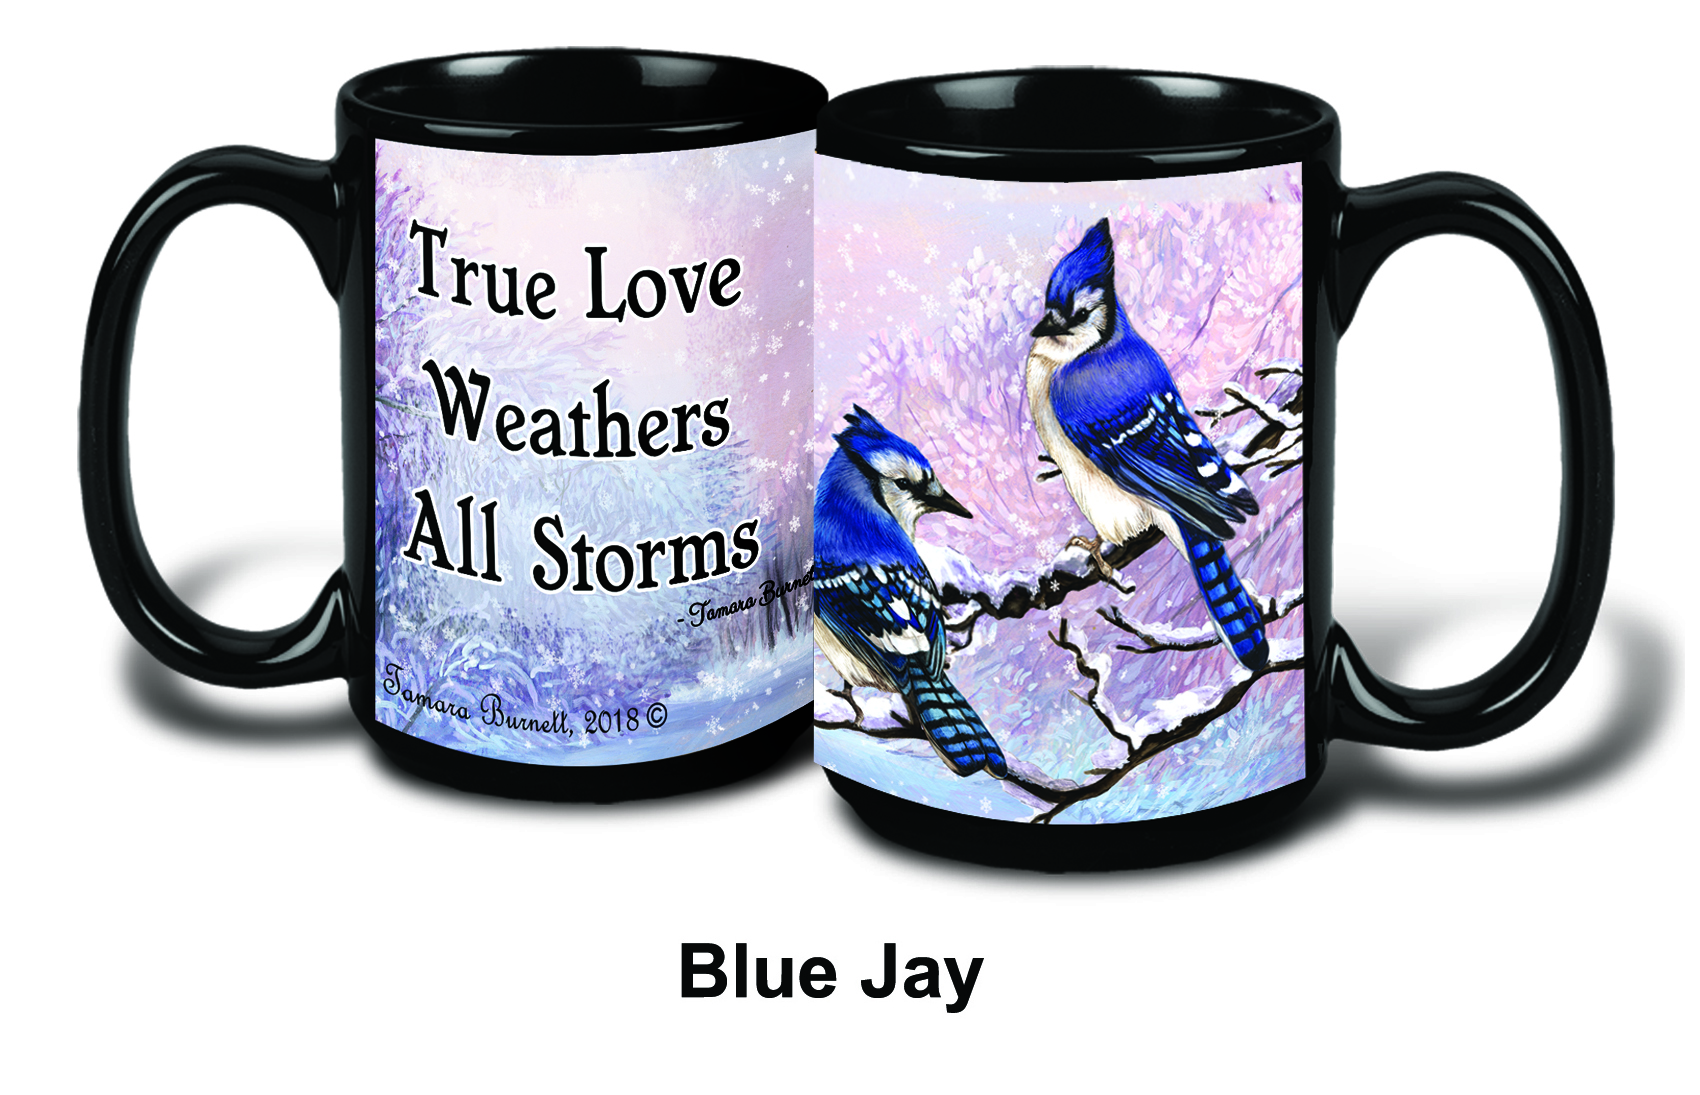 An image of the Blue Jays Eastern Winter Mugs